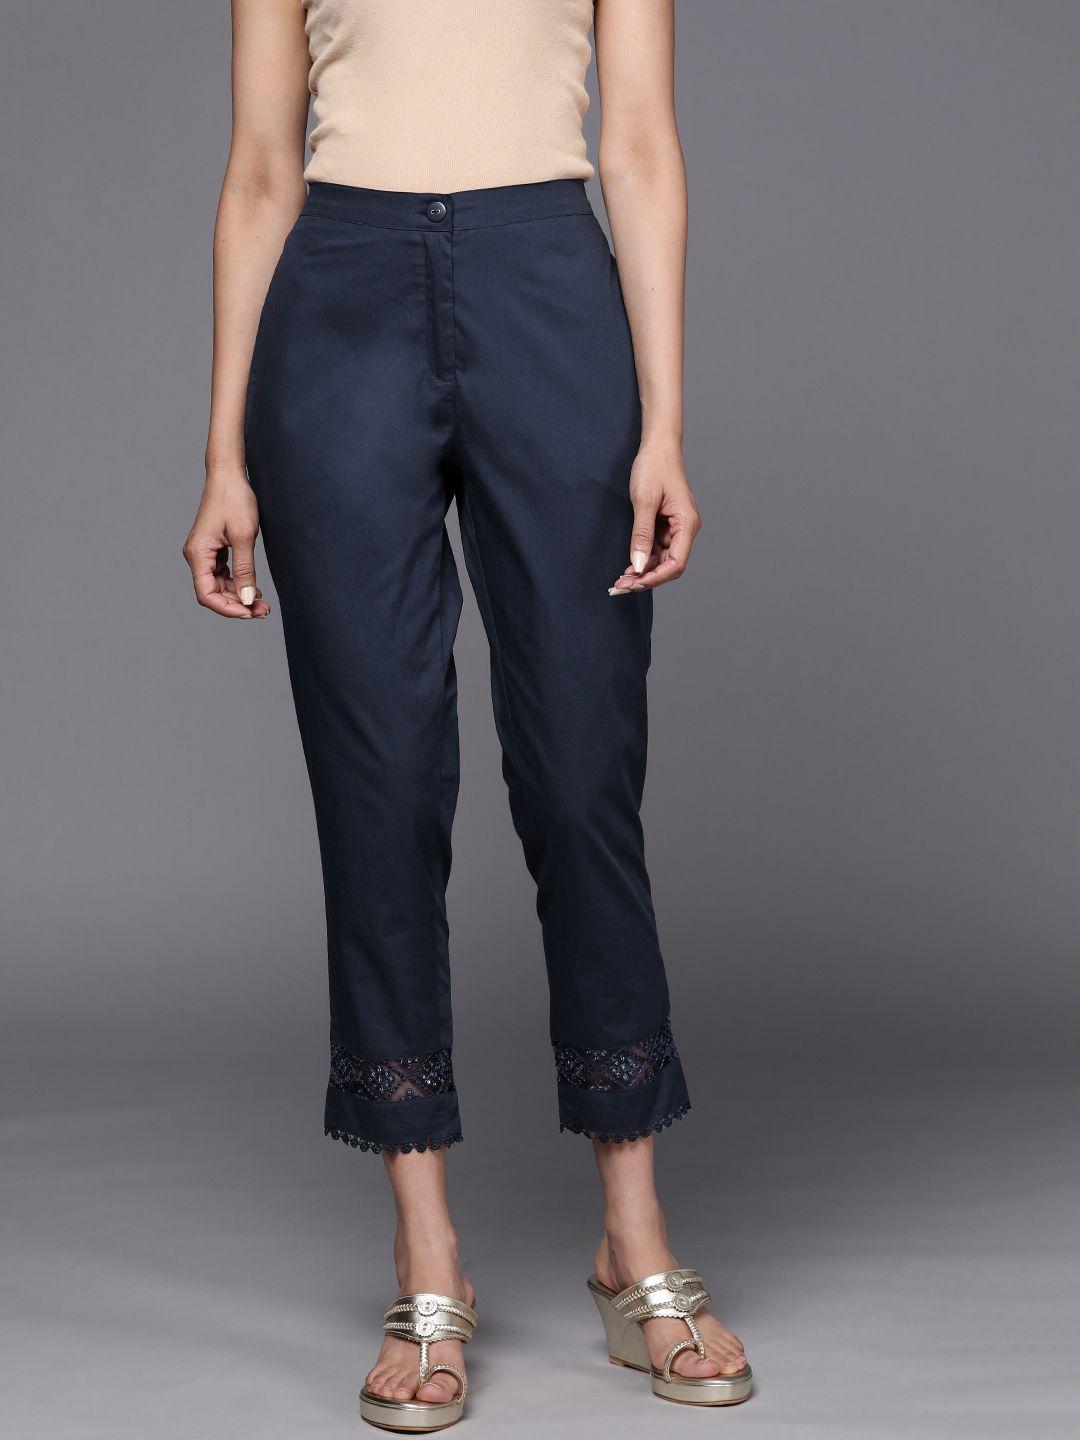 libas women navy blue pure cotton trousers with lace details at hem